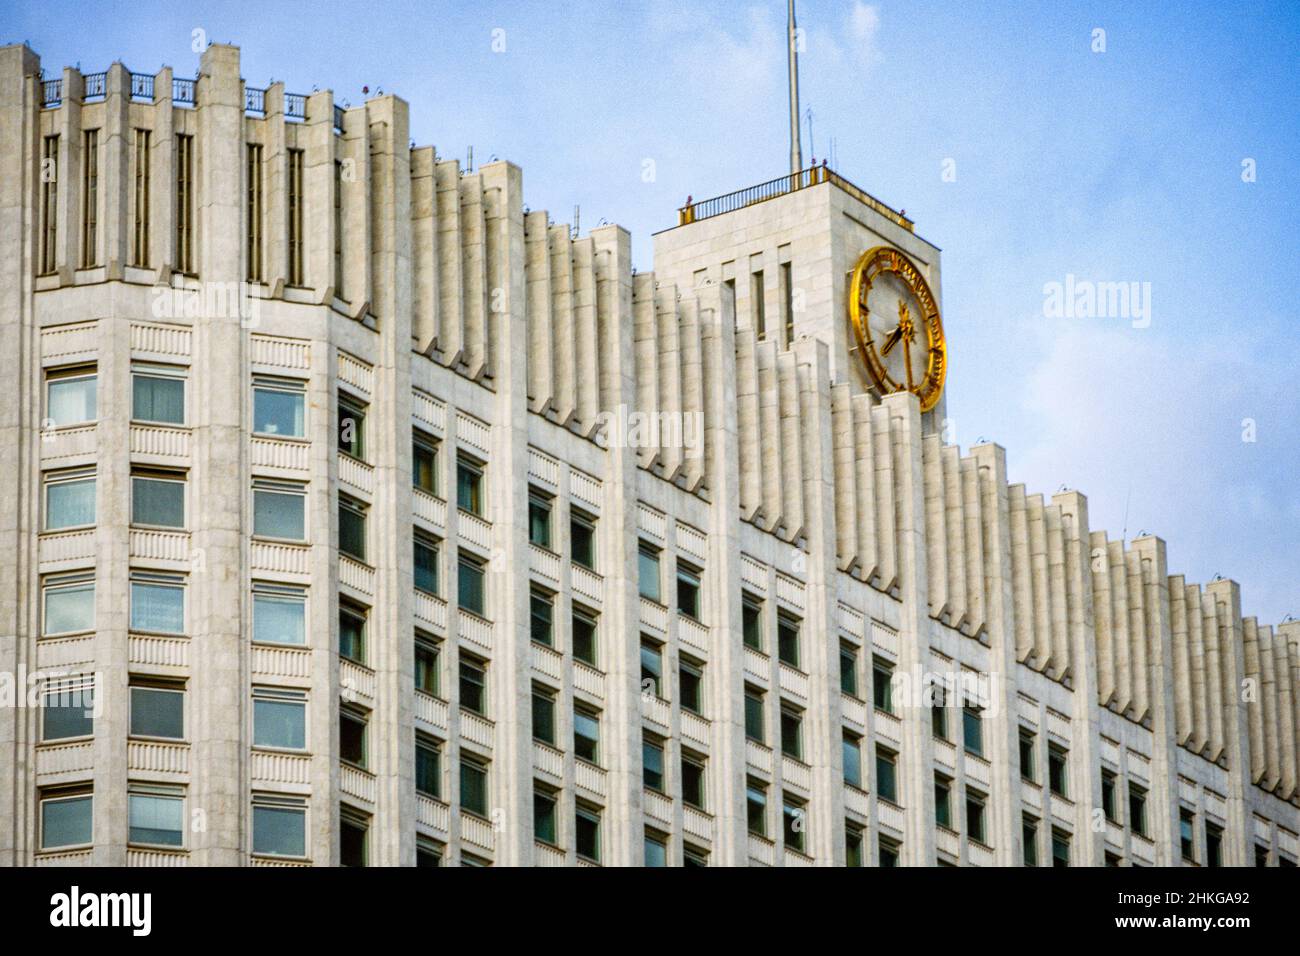 April 1993: The House of the Government of the Russian Federation, before being damaged during the October 1993 Russian constitutional crisis. Stock Photo